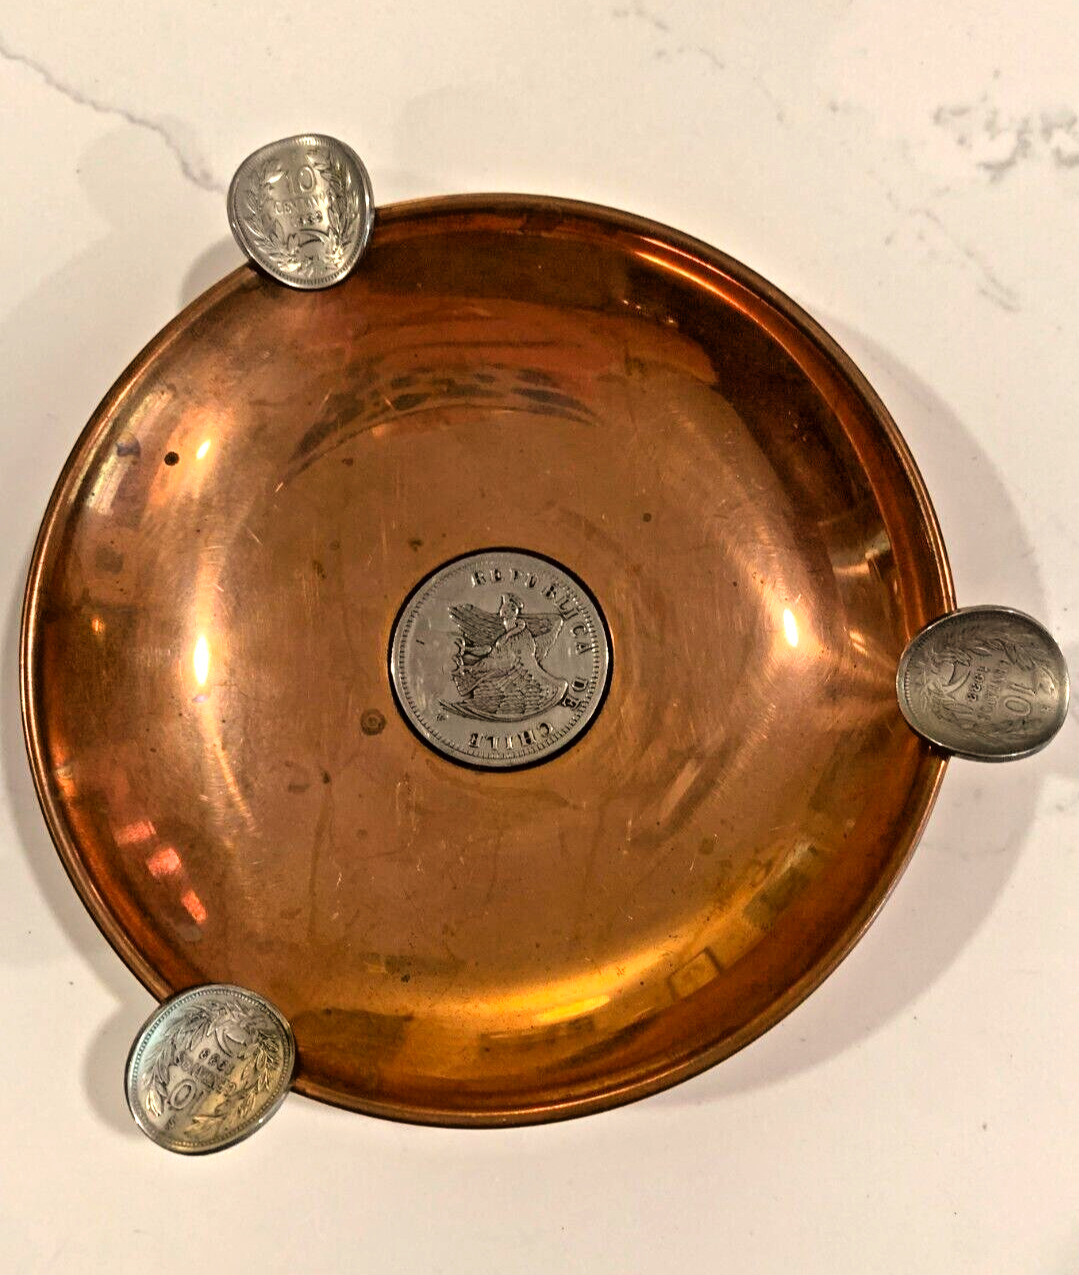 Republic De Chile Vintage Copper Ashtray Decorated With Coins  4.5 inches